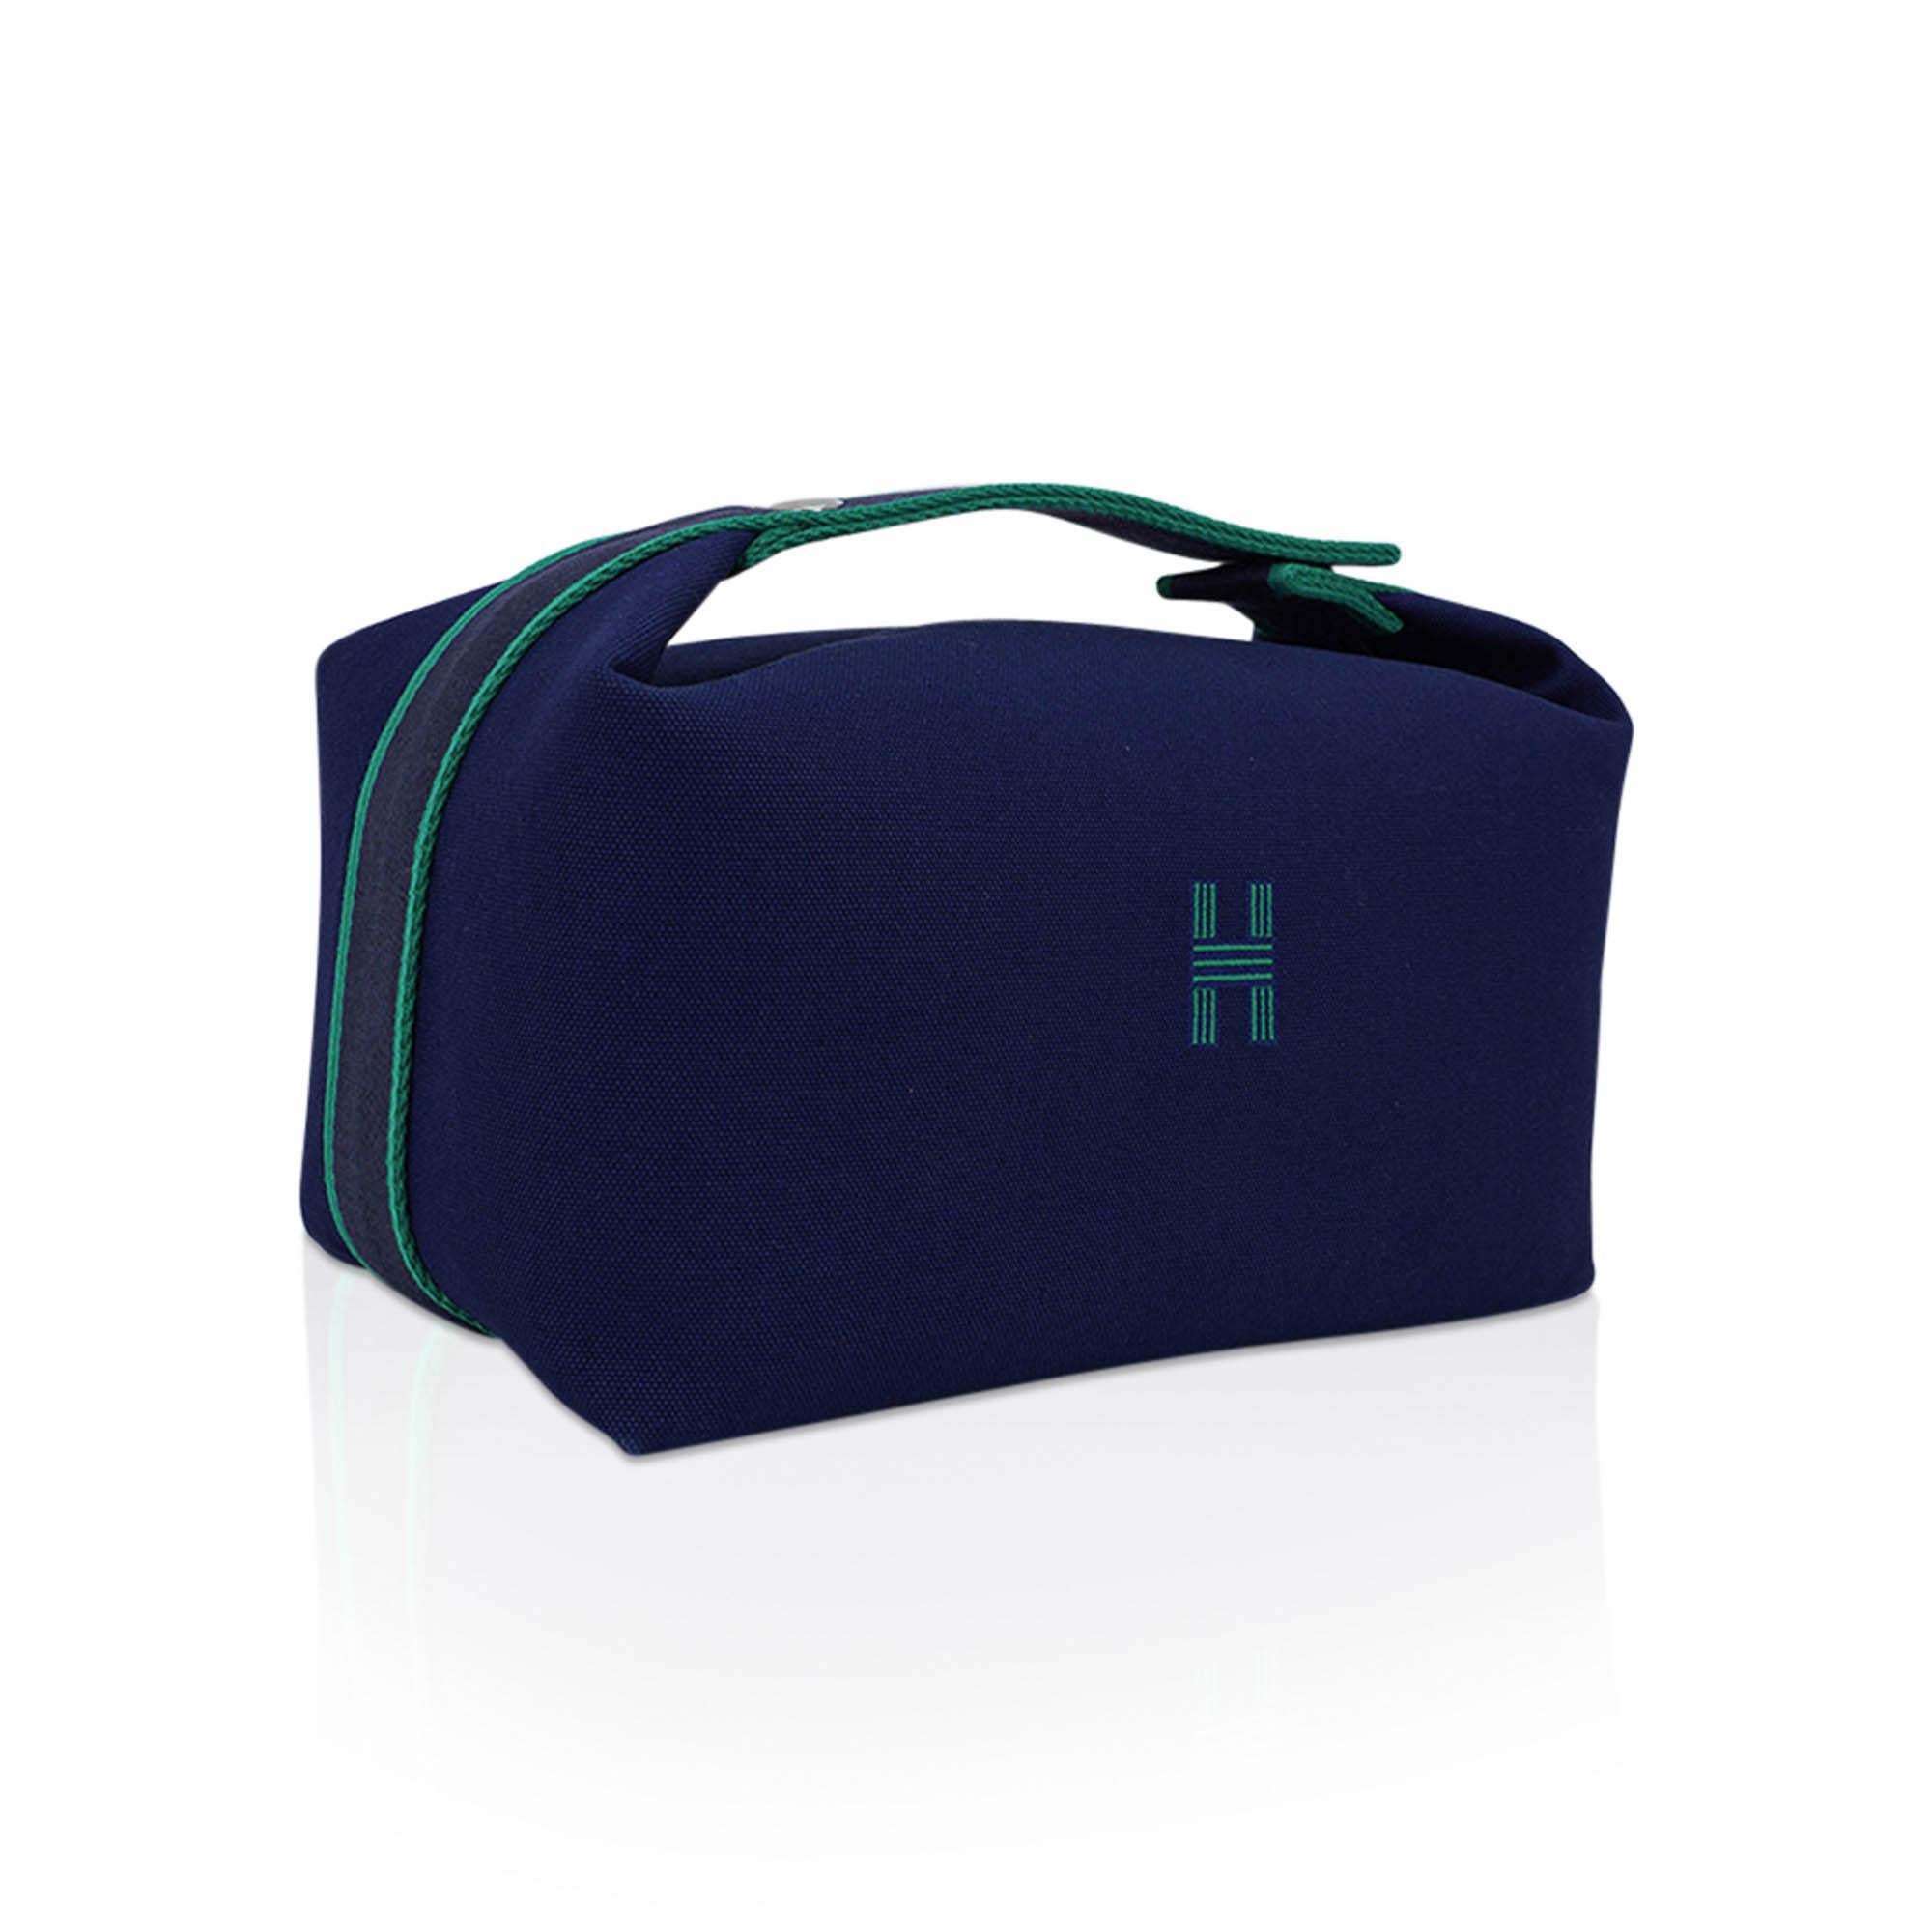 Mightychic offers an Hermes Trousse de Toilette case featured in Marine H Plume canvas.
Embroidered H on the front.
Top strap, inspired by a Gianpaolo Pagni drawing, features a woven Green zig zag.
With two Clou de Selle snaps, the strap opens over